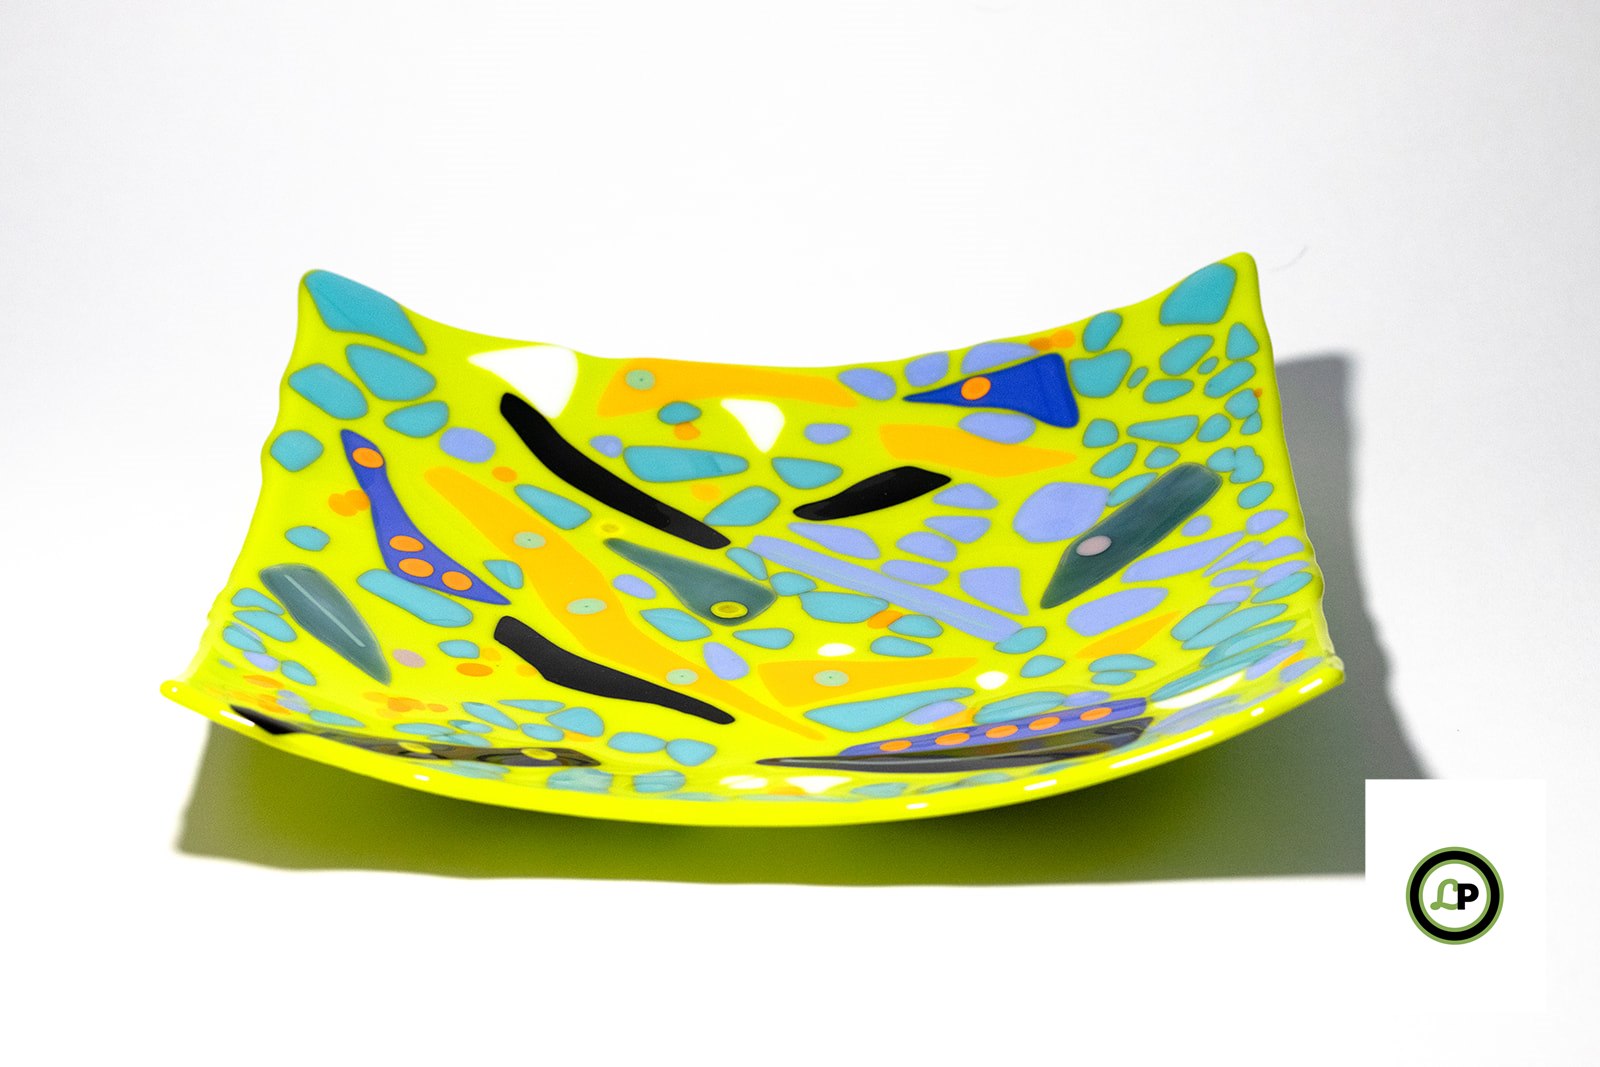 lime green glass plate with dots on top